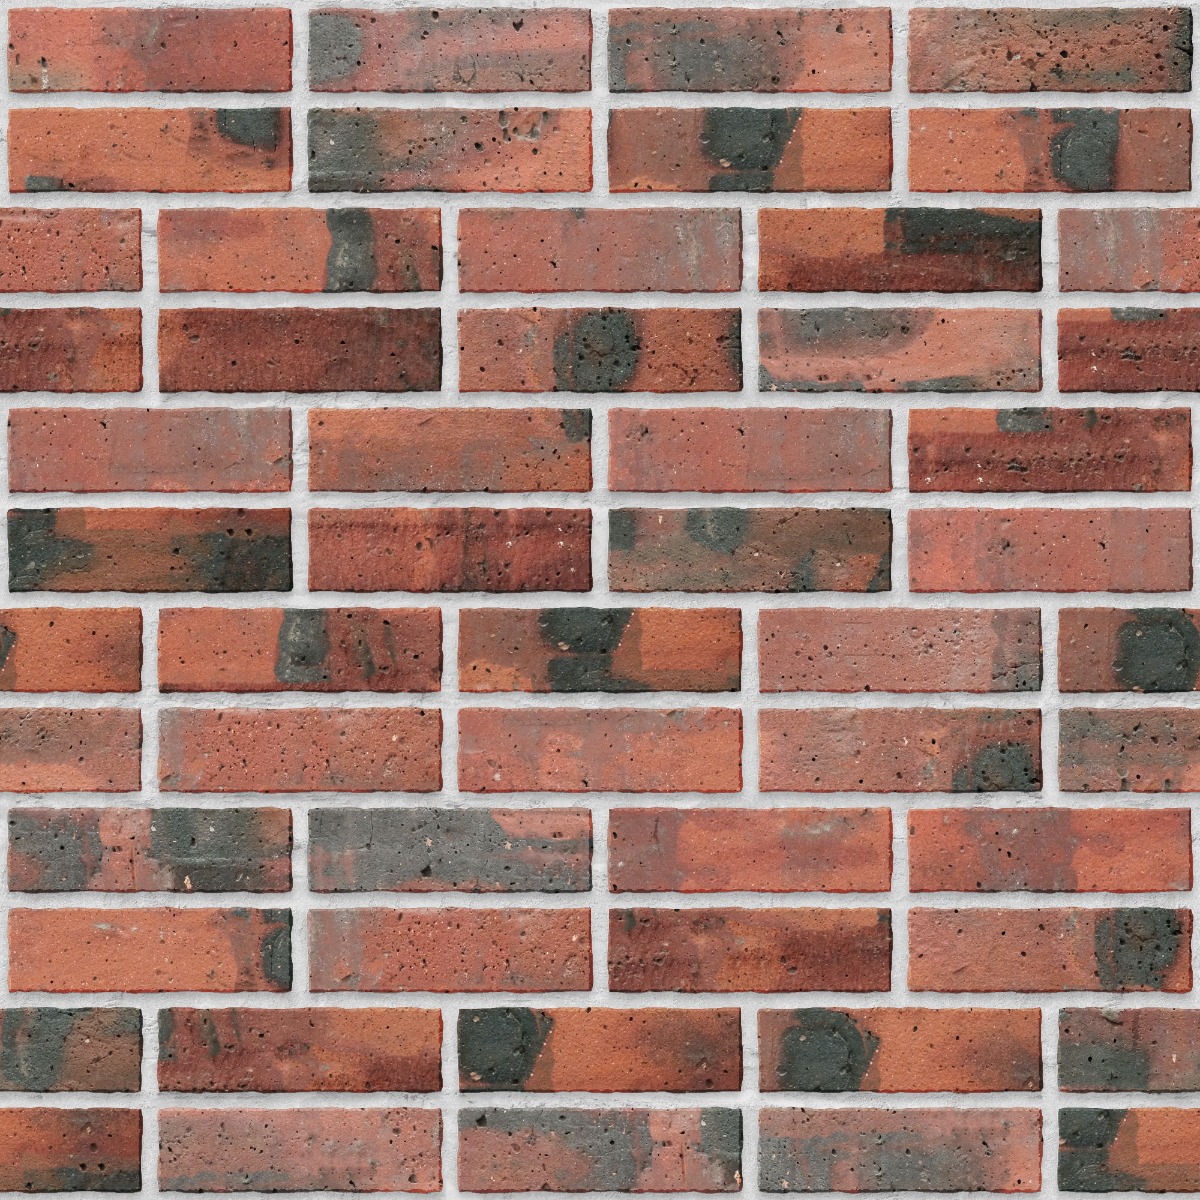 A seamless brick texture with industrial brick units arranged in a Double Stretcher pattern